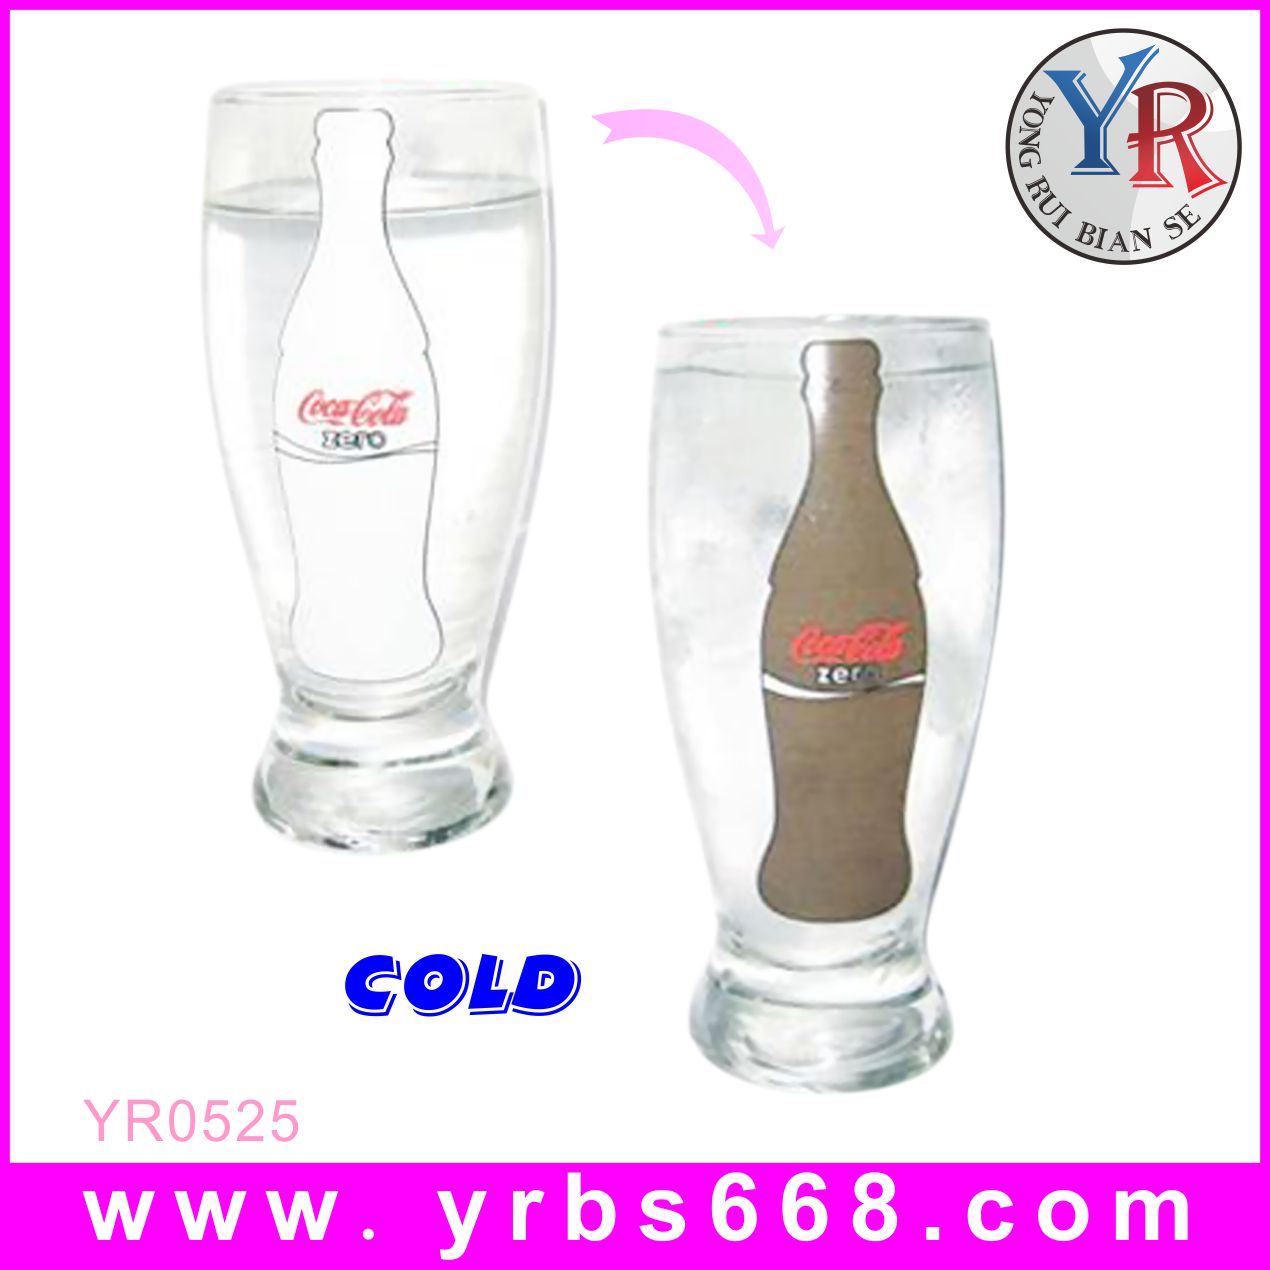 Olive glass of cold beer cup